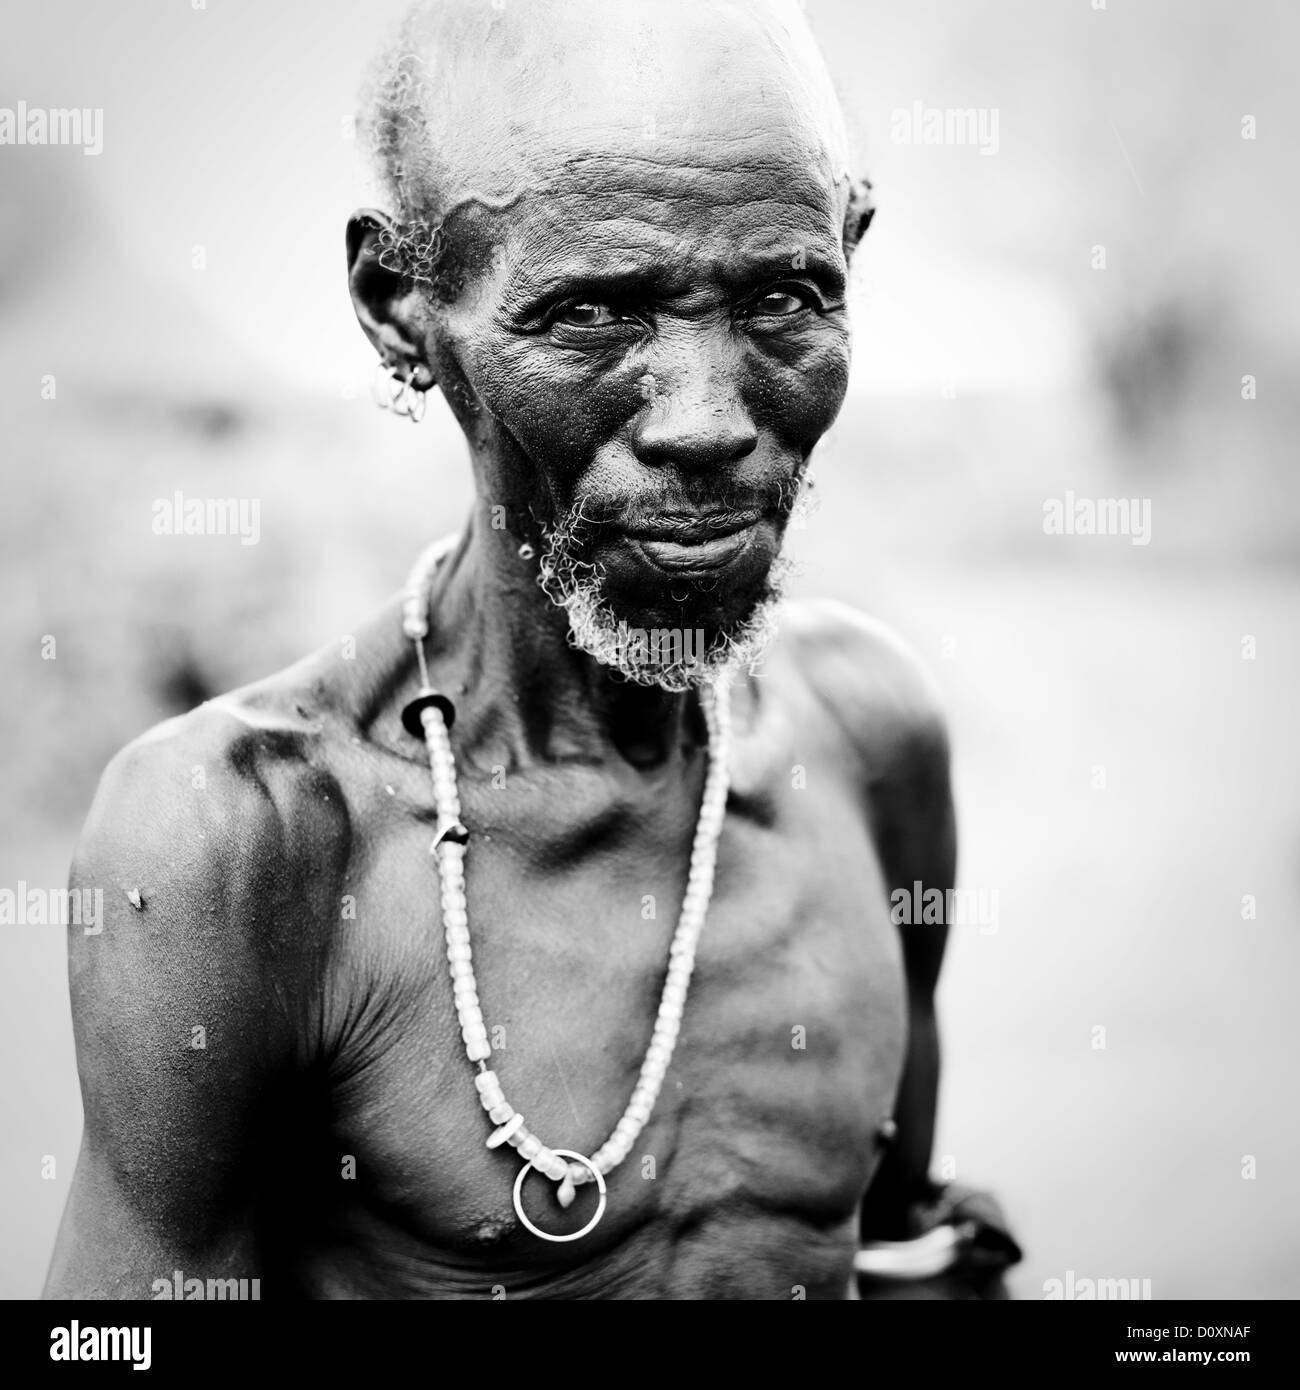 Skinny Black and White Stock Photos & Images - Alamy